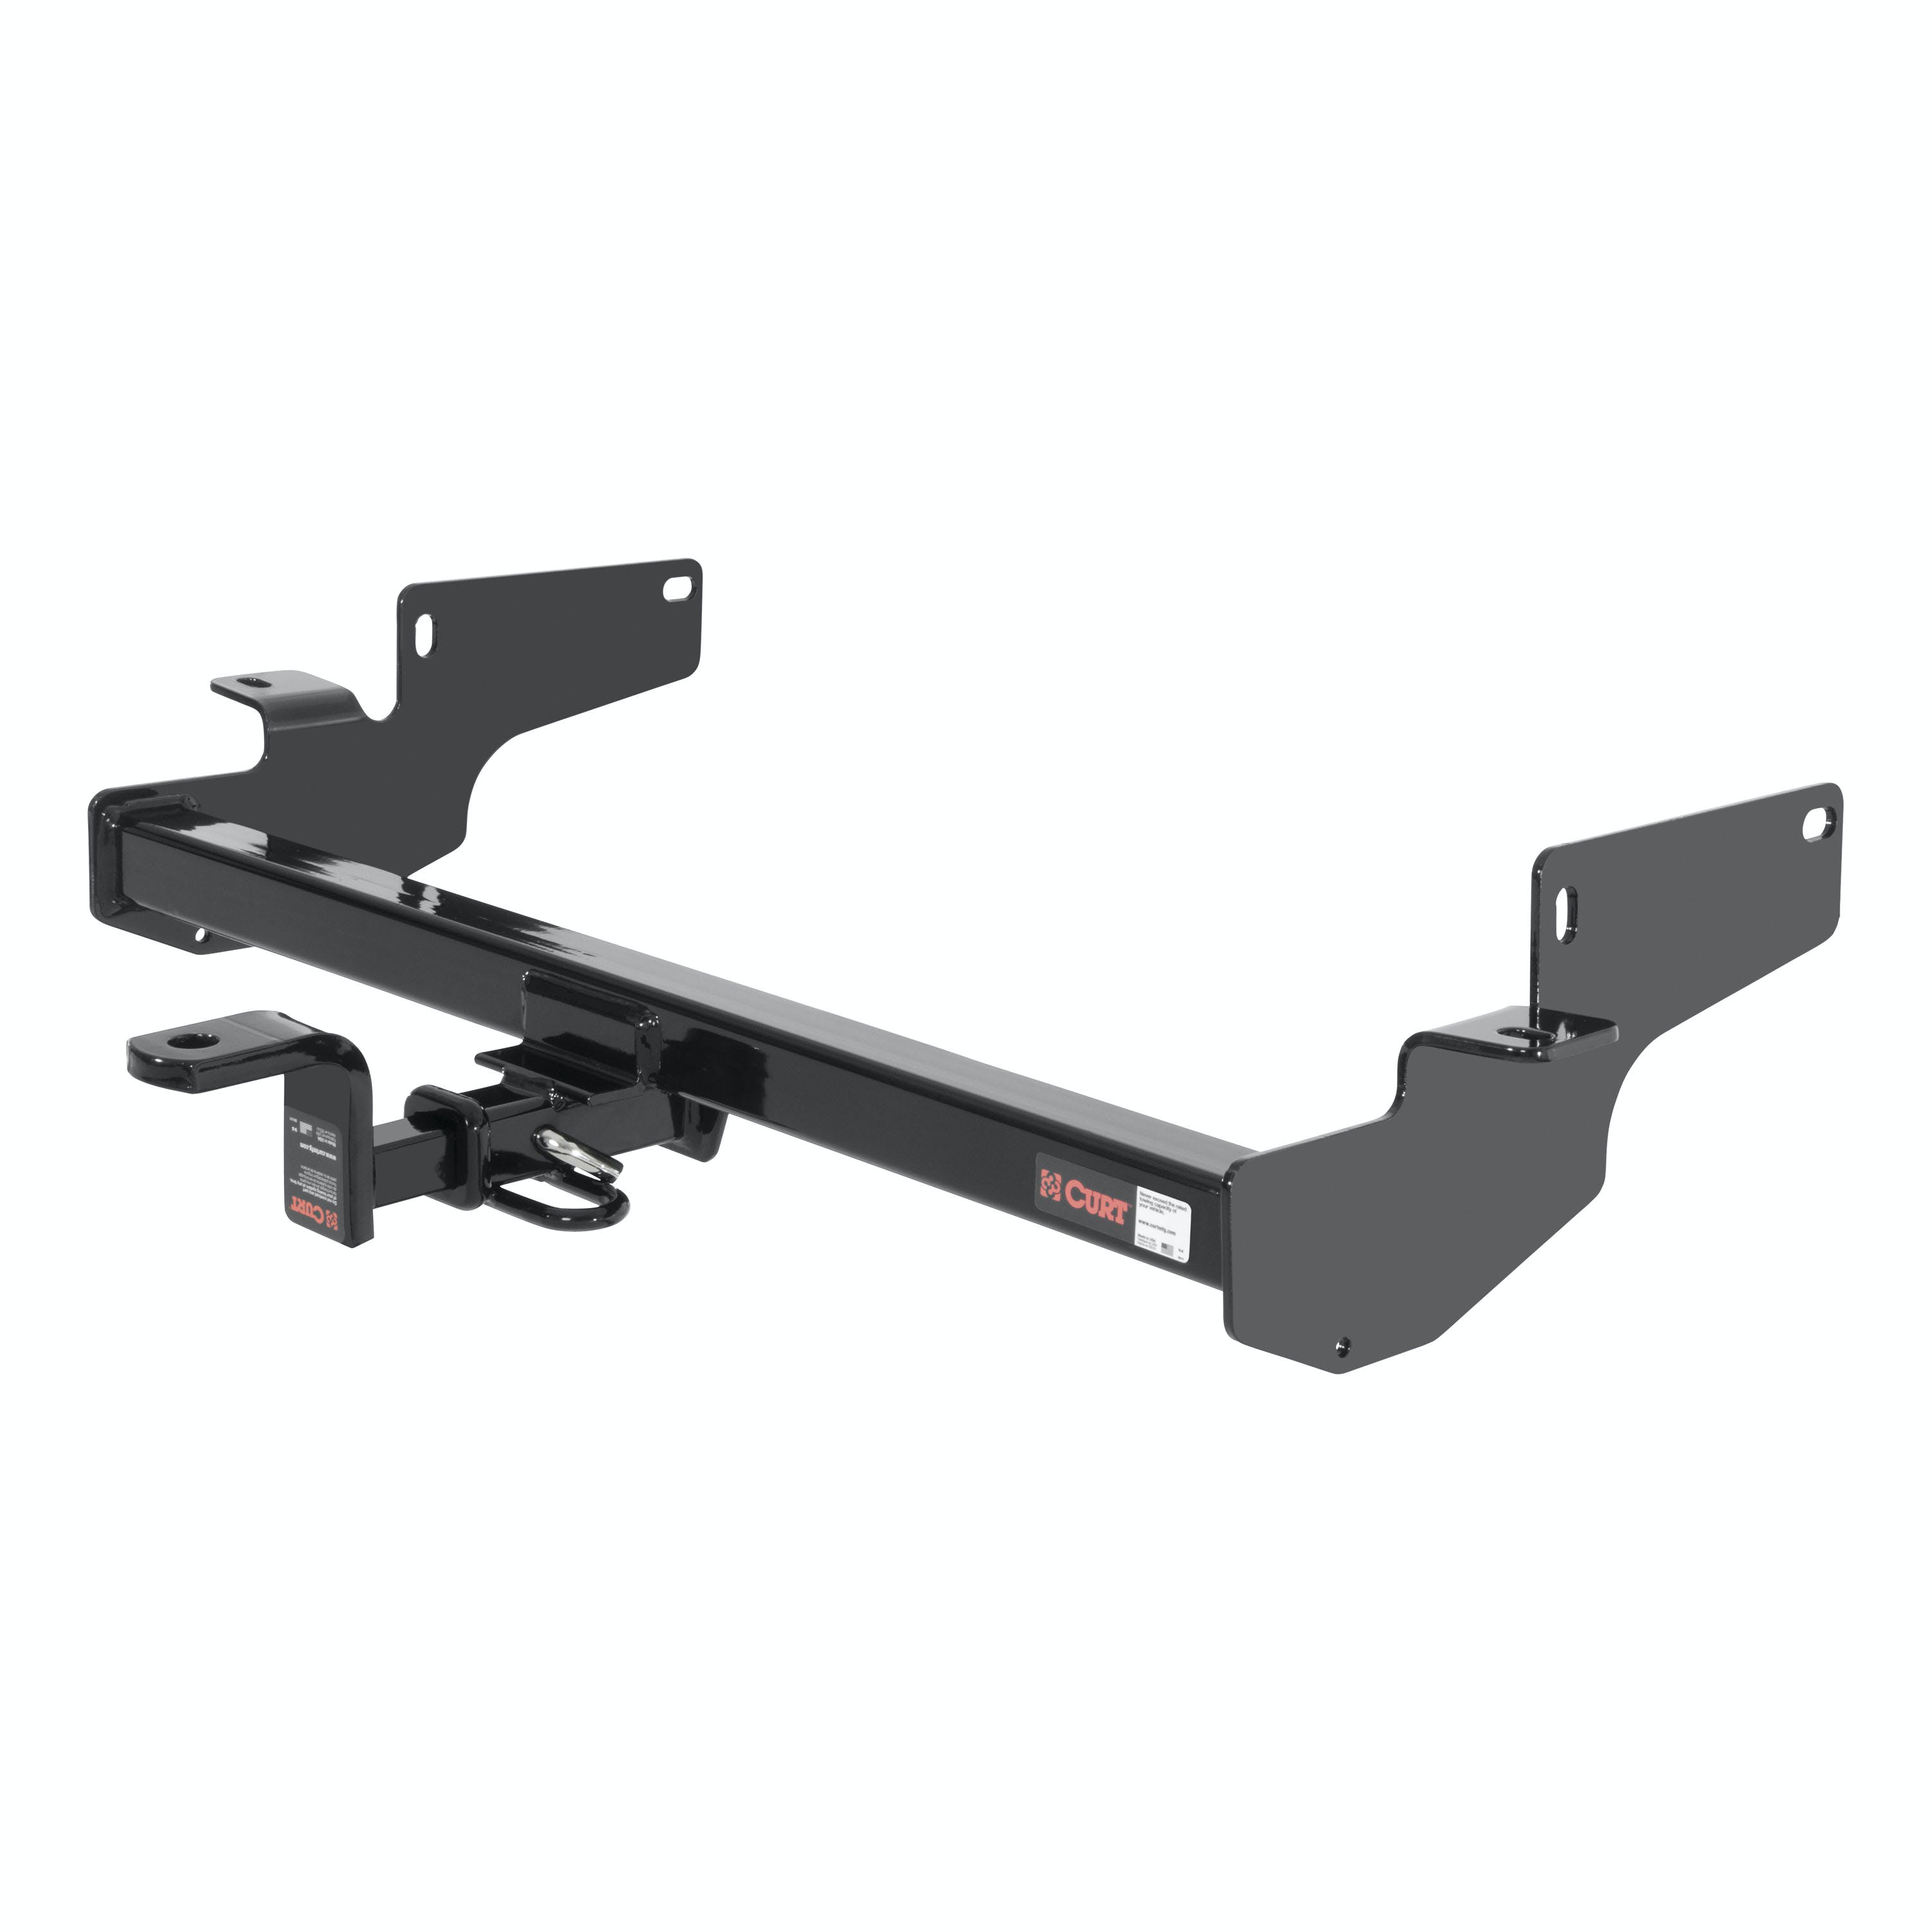 CURT 120583 Class 2 Trailer Hitch, 1-1/4 Ball Mount, Select Cadillac DeVille, DTS